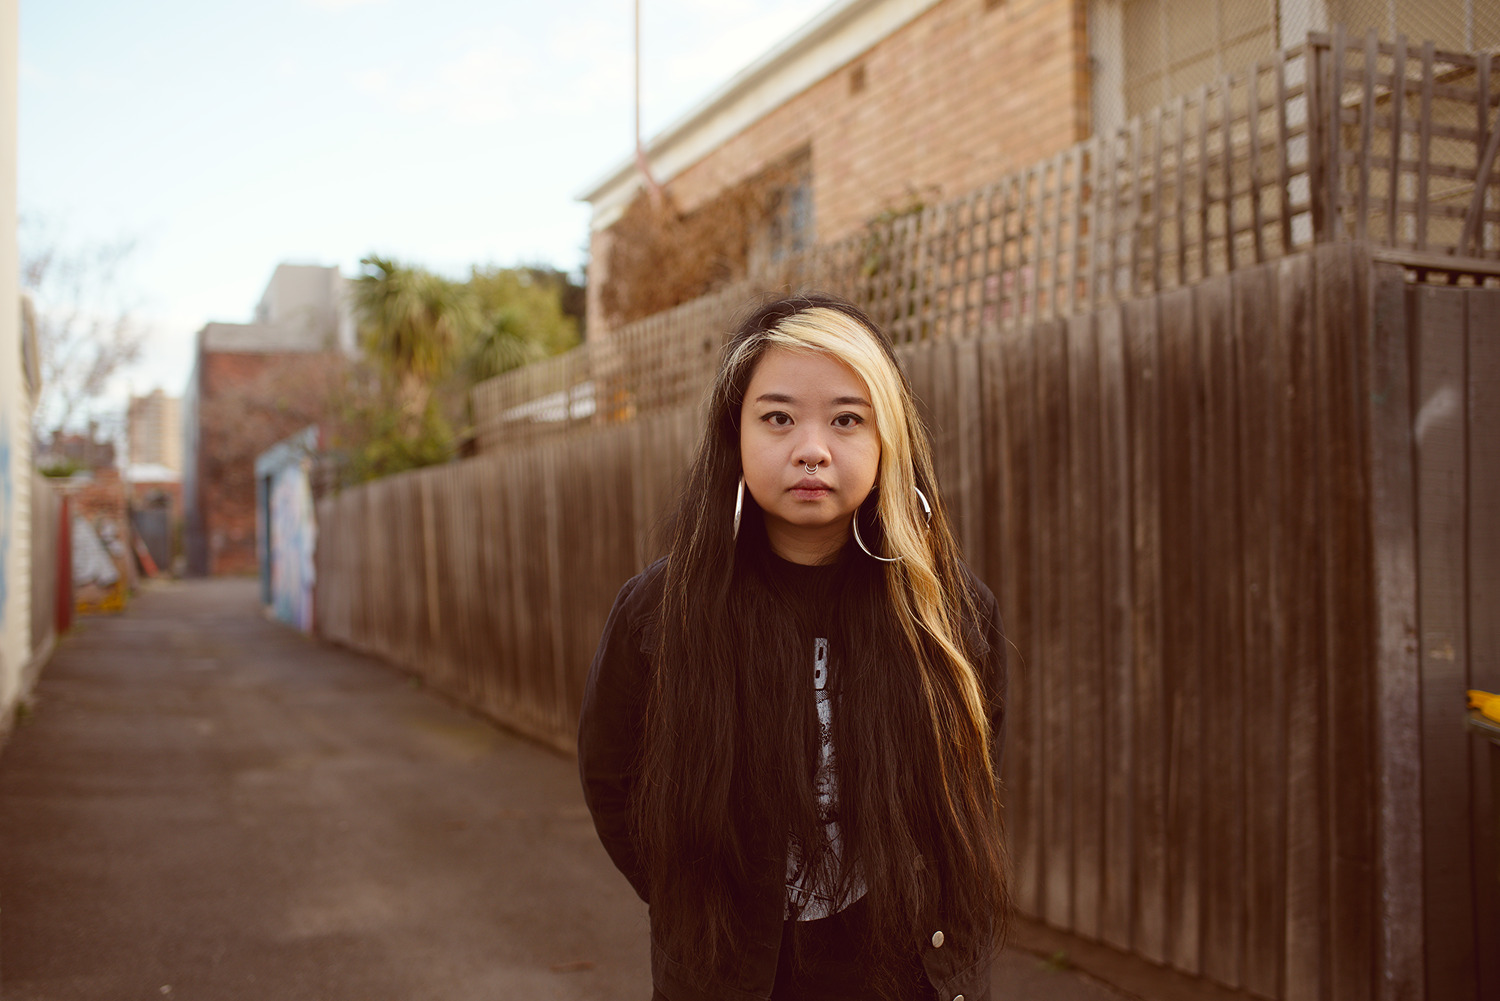 A woman stands in a laneway with long black hair and a streak of blonde down one side looking directly at the camera